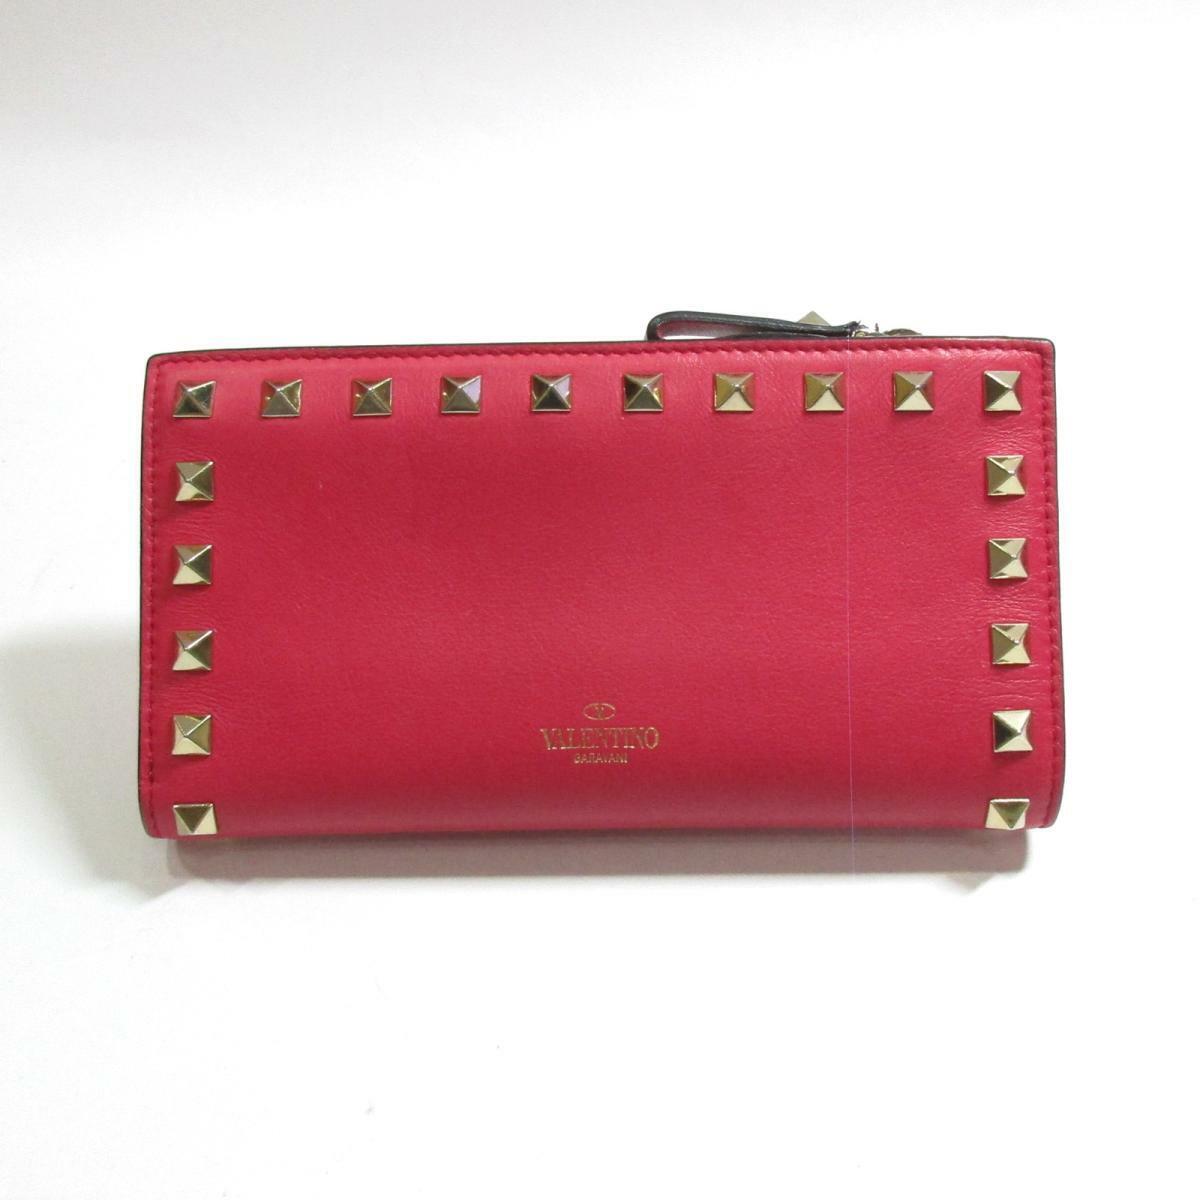 Authentic VALENTINO long wallet Purse Calf leather Pink Used studs